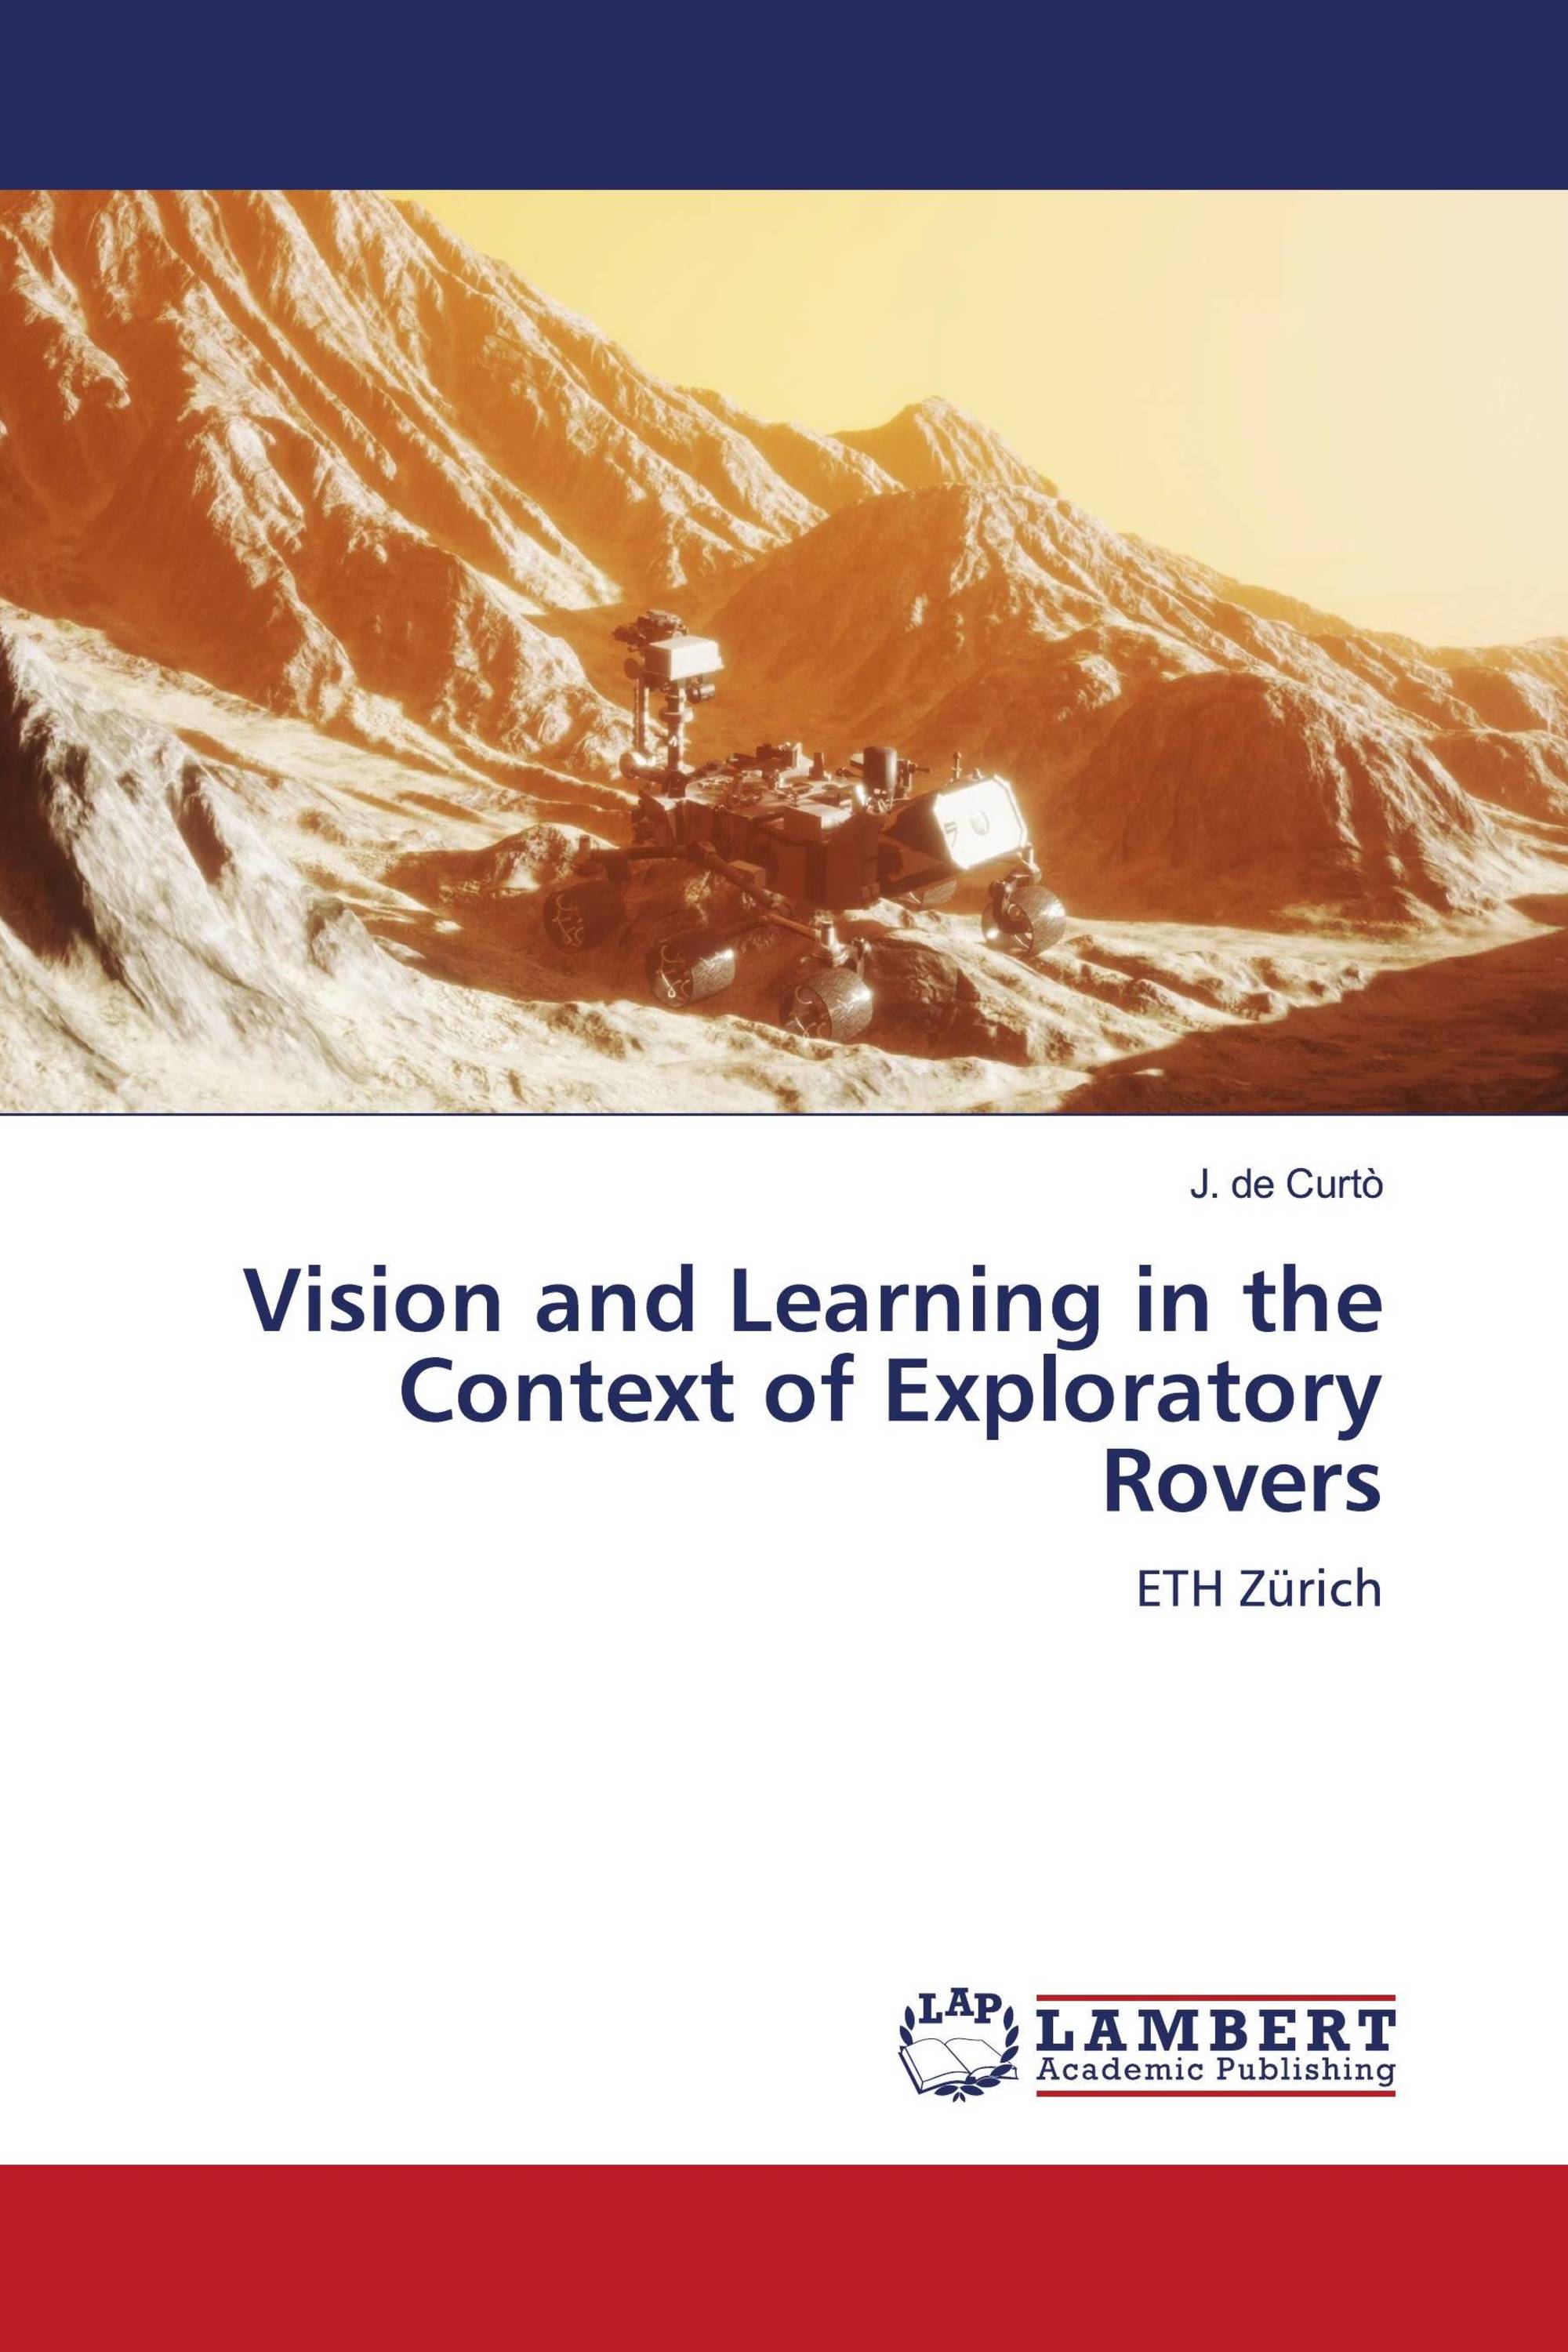 Vision and Learning in the Context of Exploratory Rovers